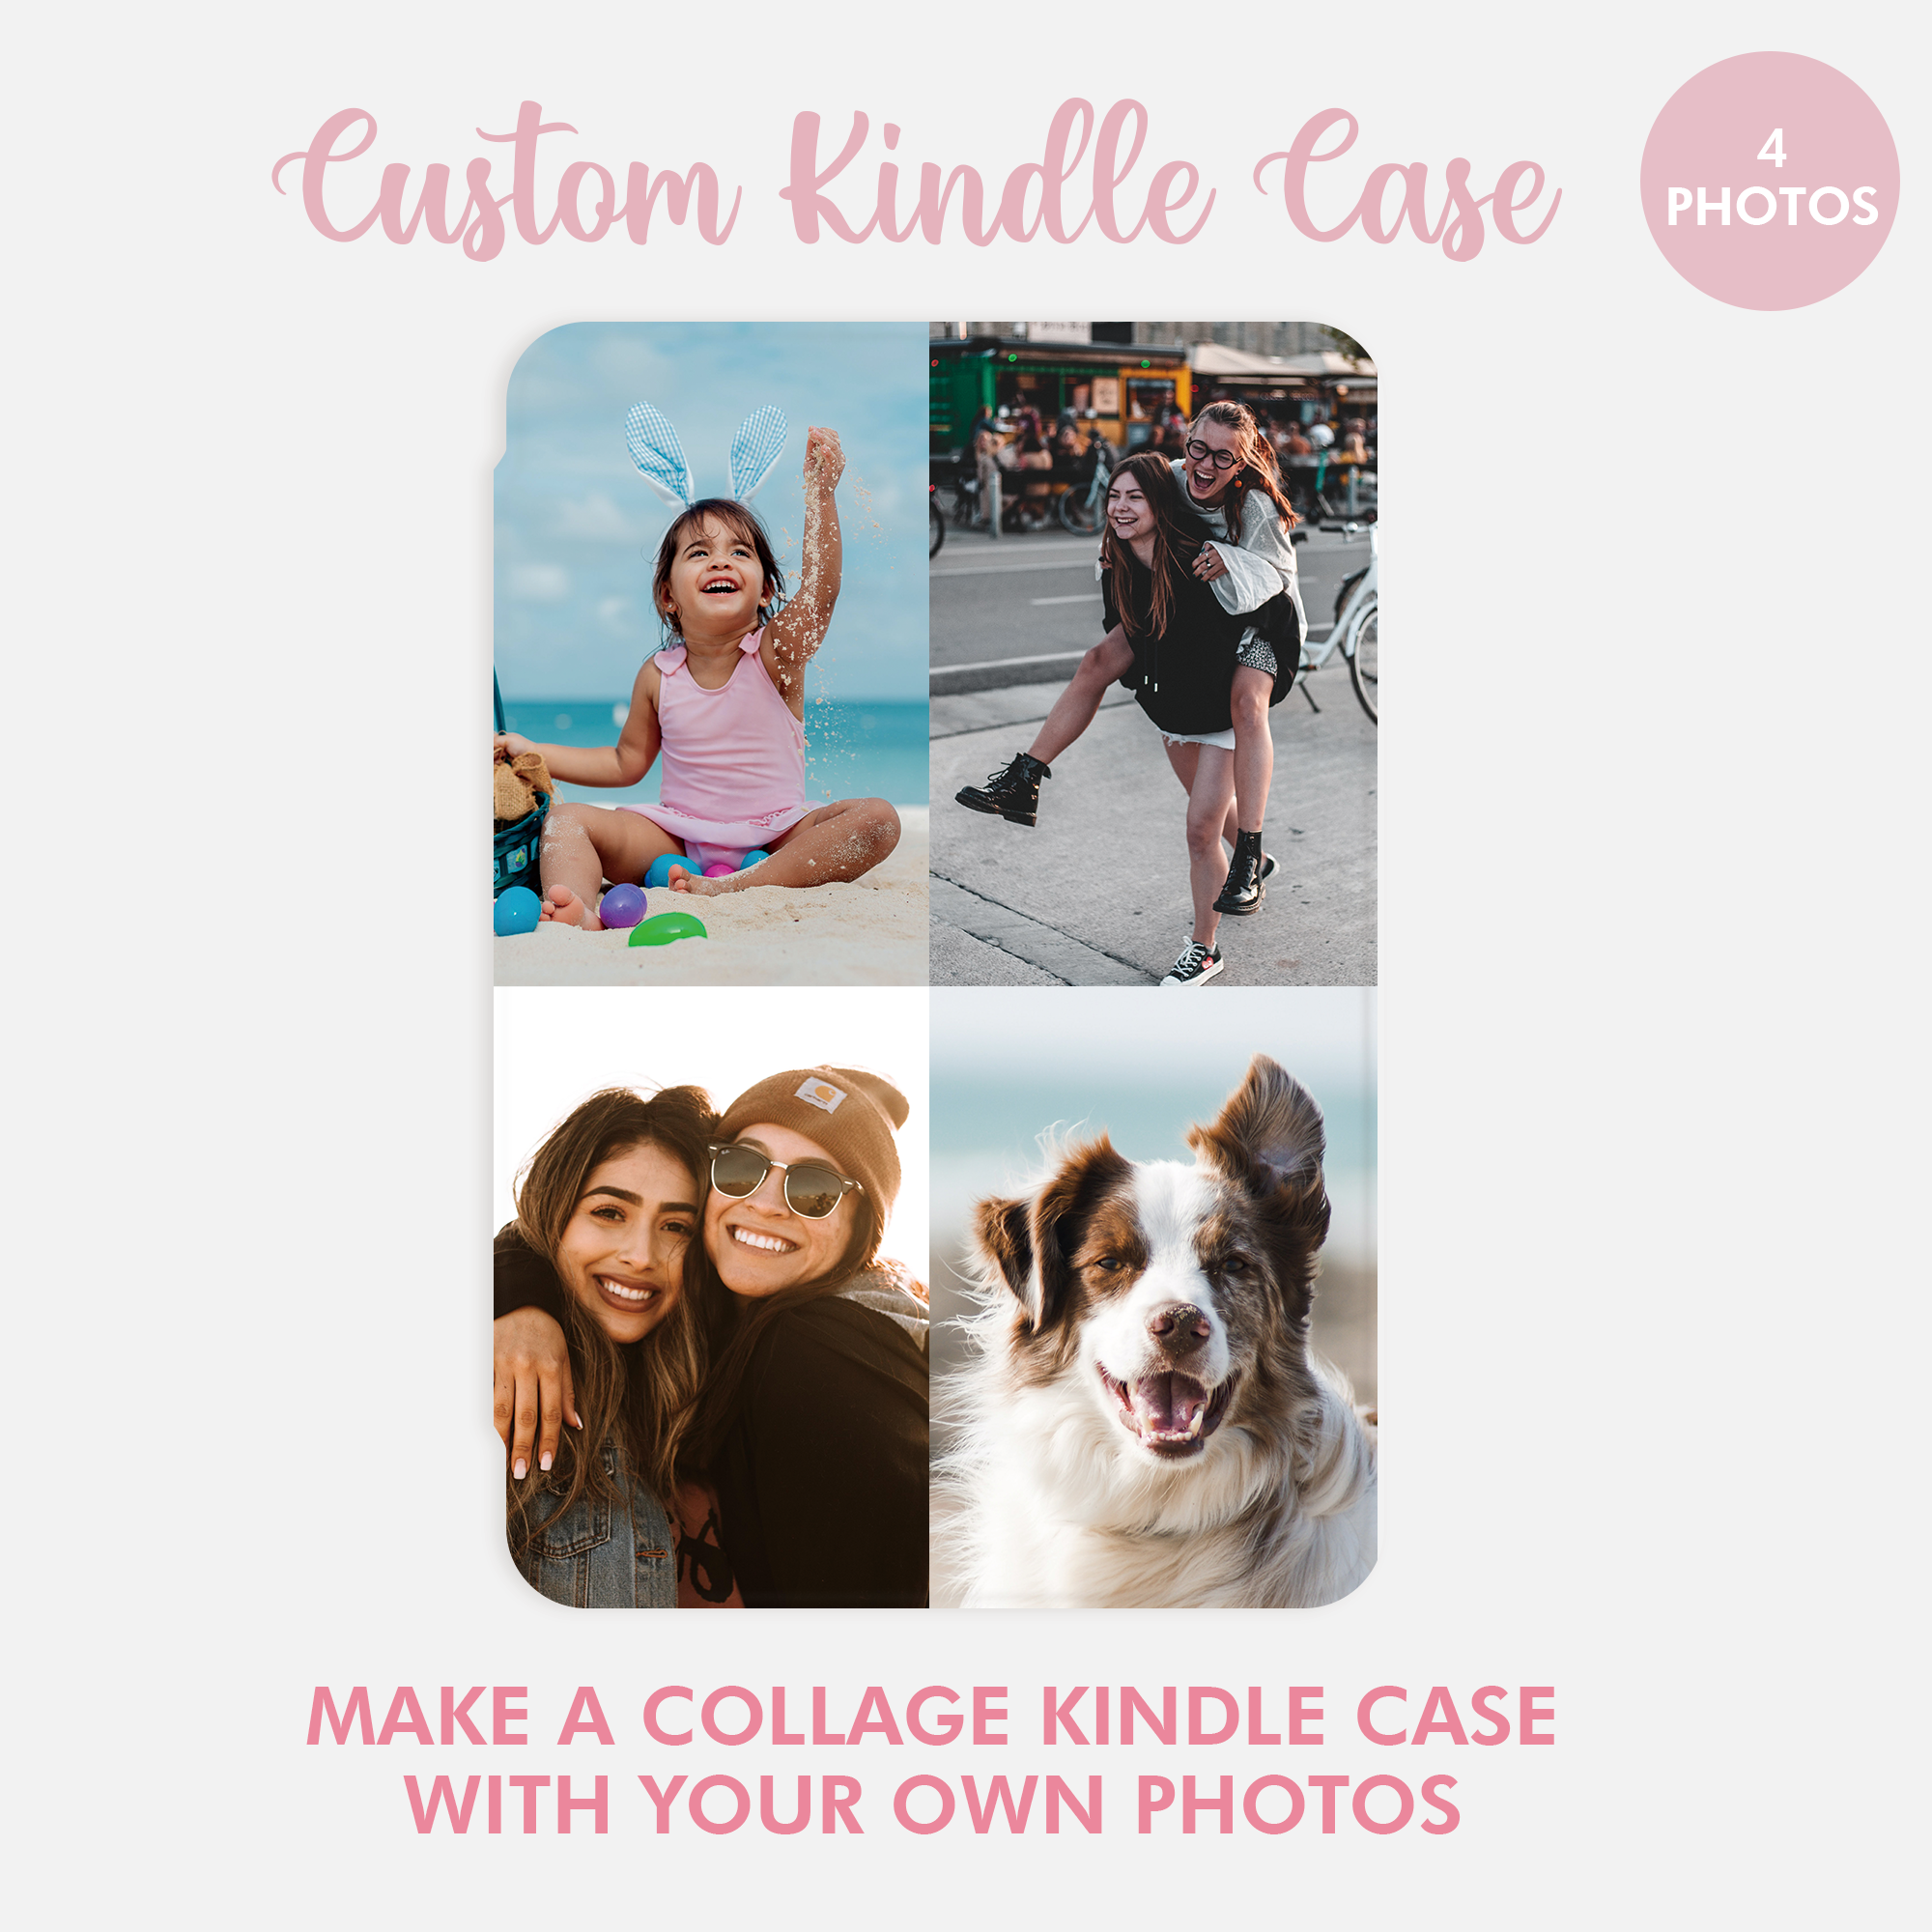 Your photo Collage Kindle custom case, Create Your Own Kindle Case with Family Photos (4 photos)